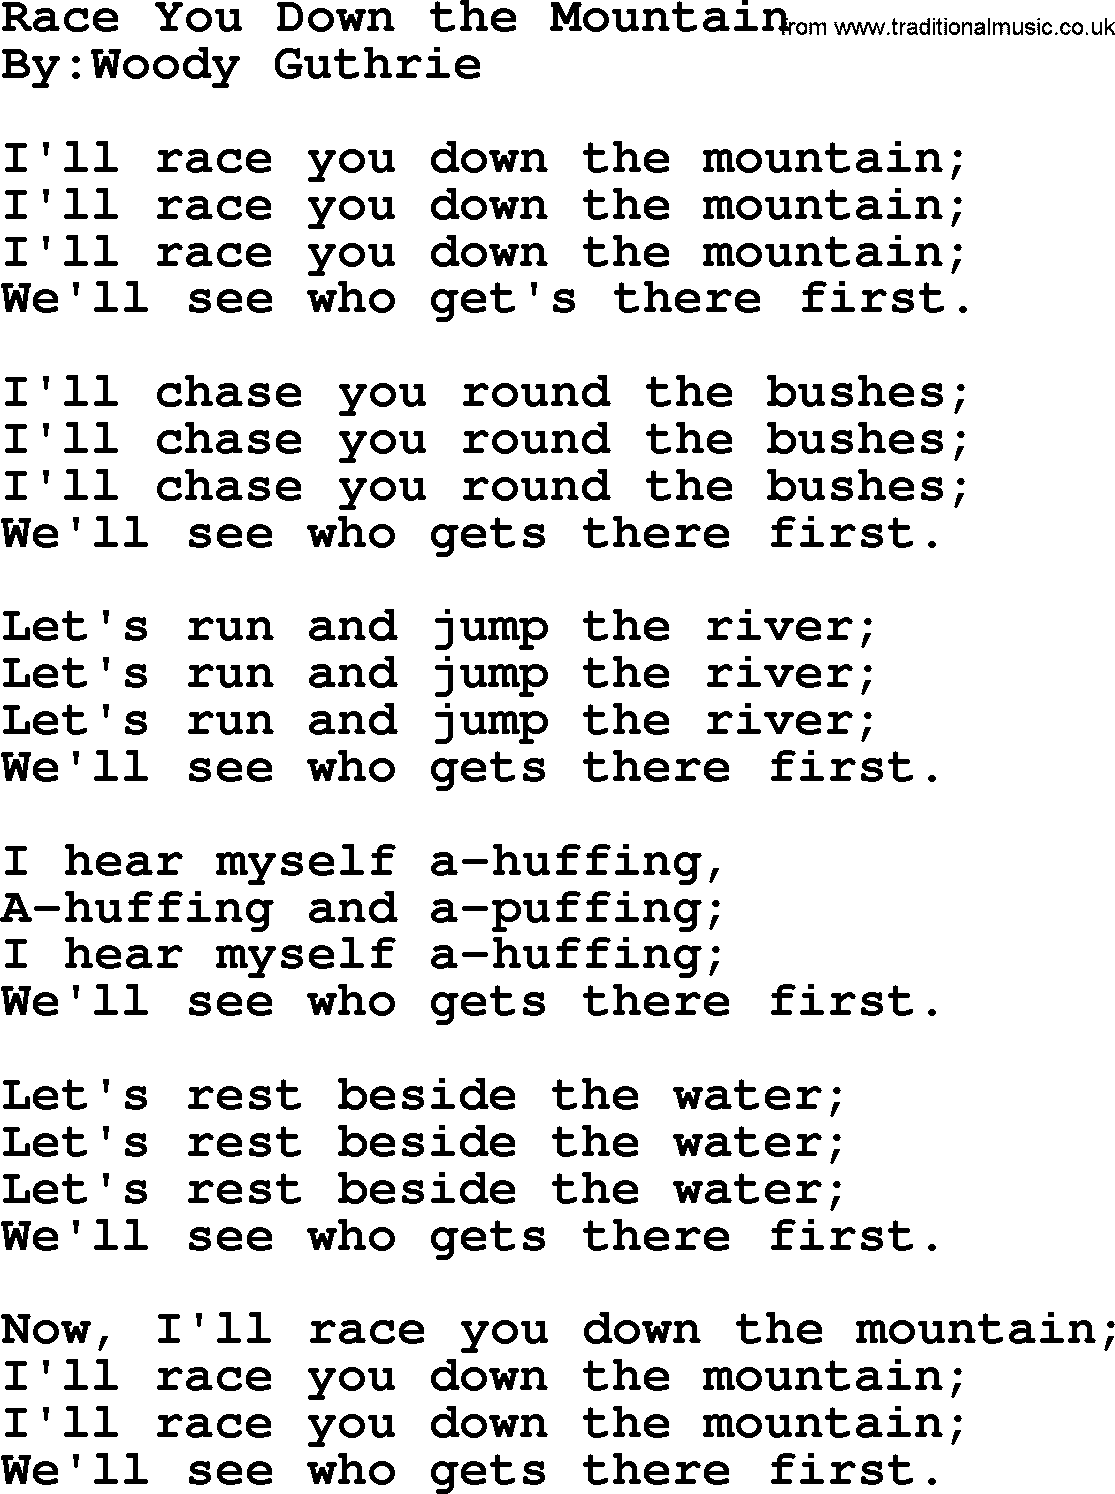 Political, Solidarity, Workers or Union song: Race You Down The Mountain, lyrics